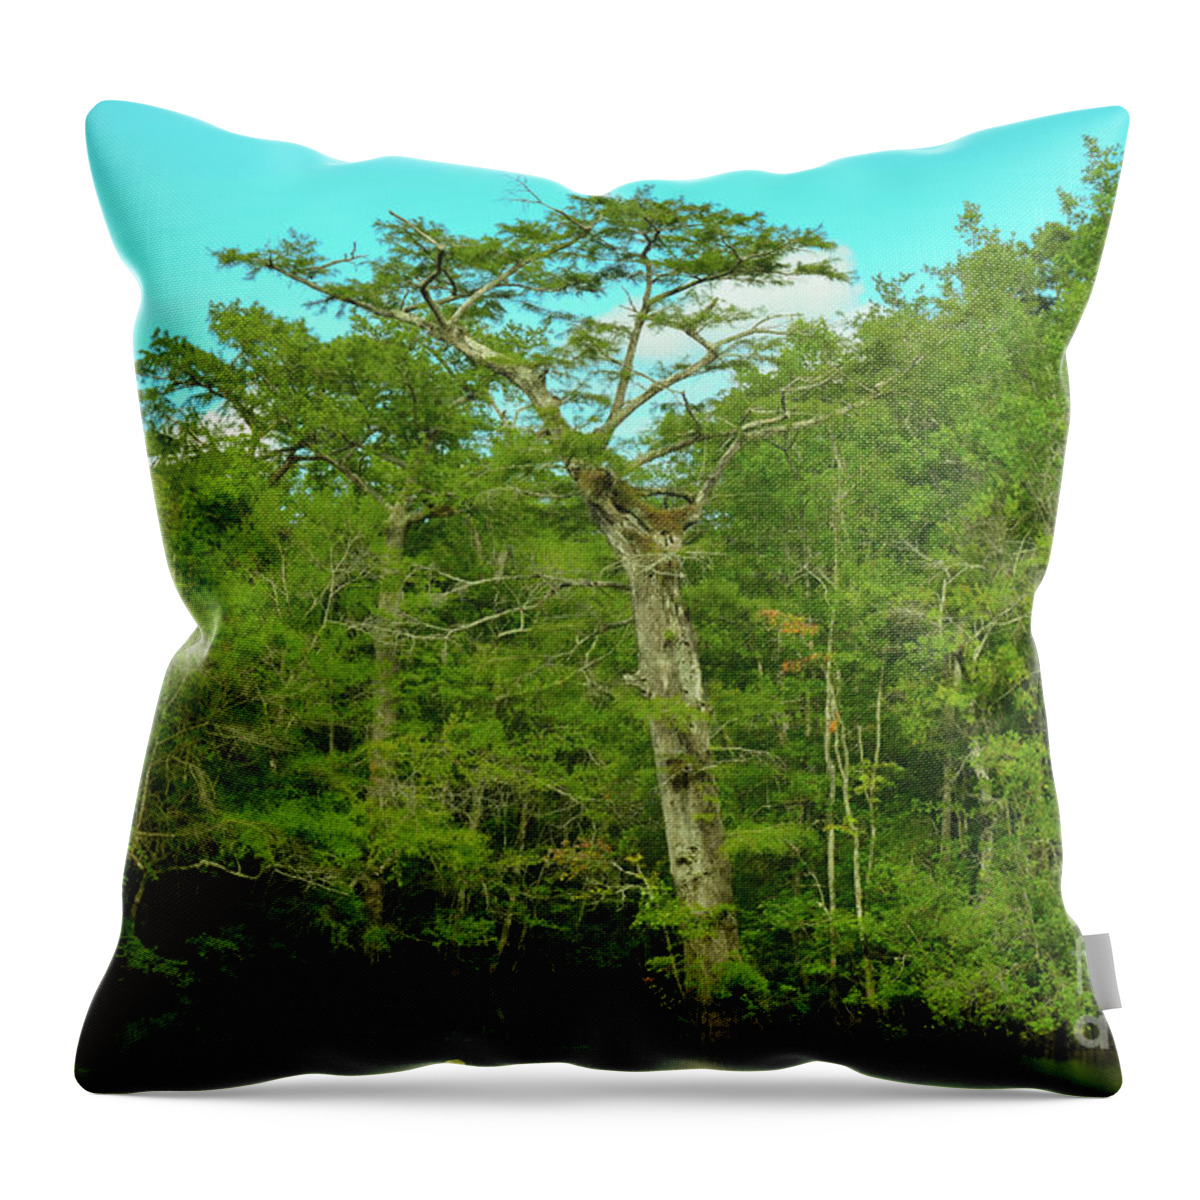 Tree Throw Pillow featuring the photograph Swamp Tree by Marc Watkins